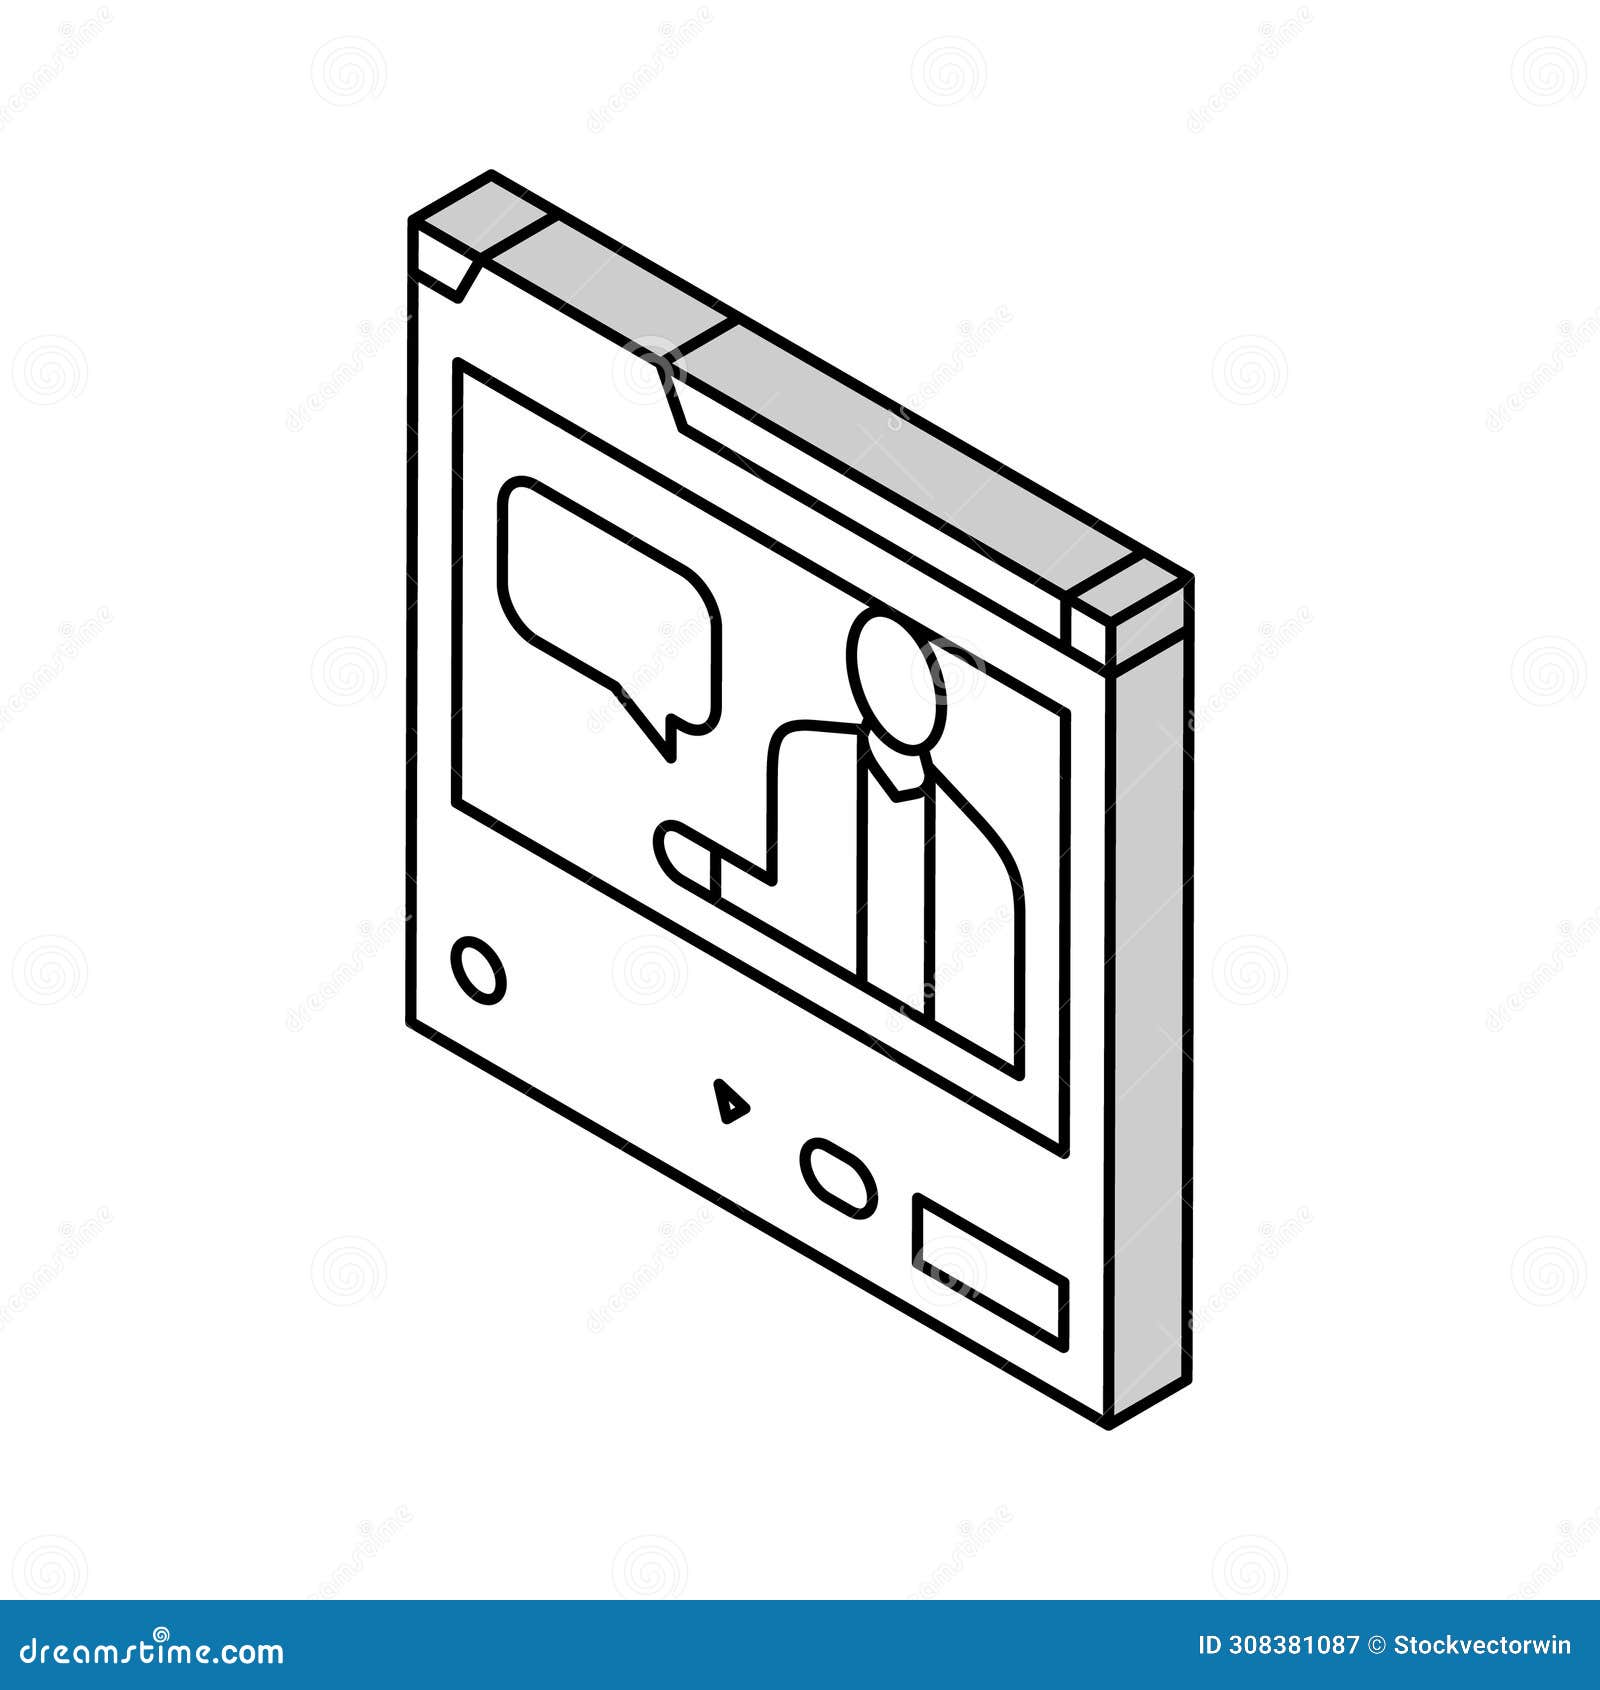 video lectures online learning platform isometric icon  